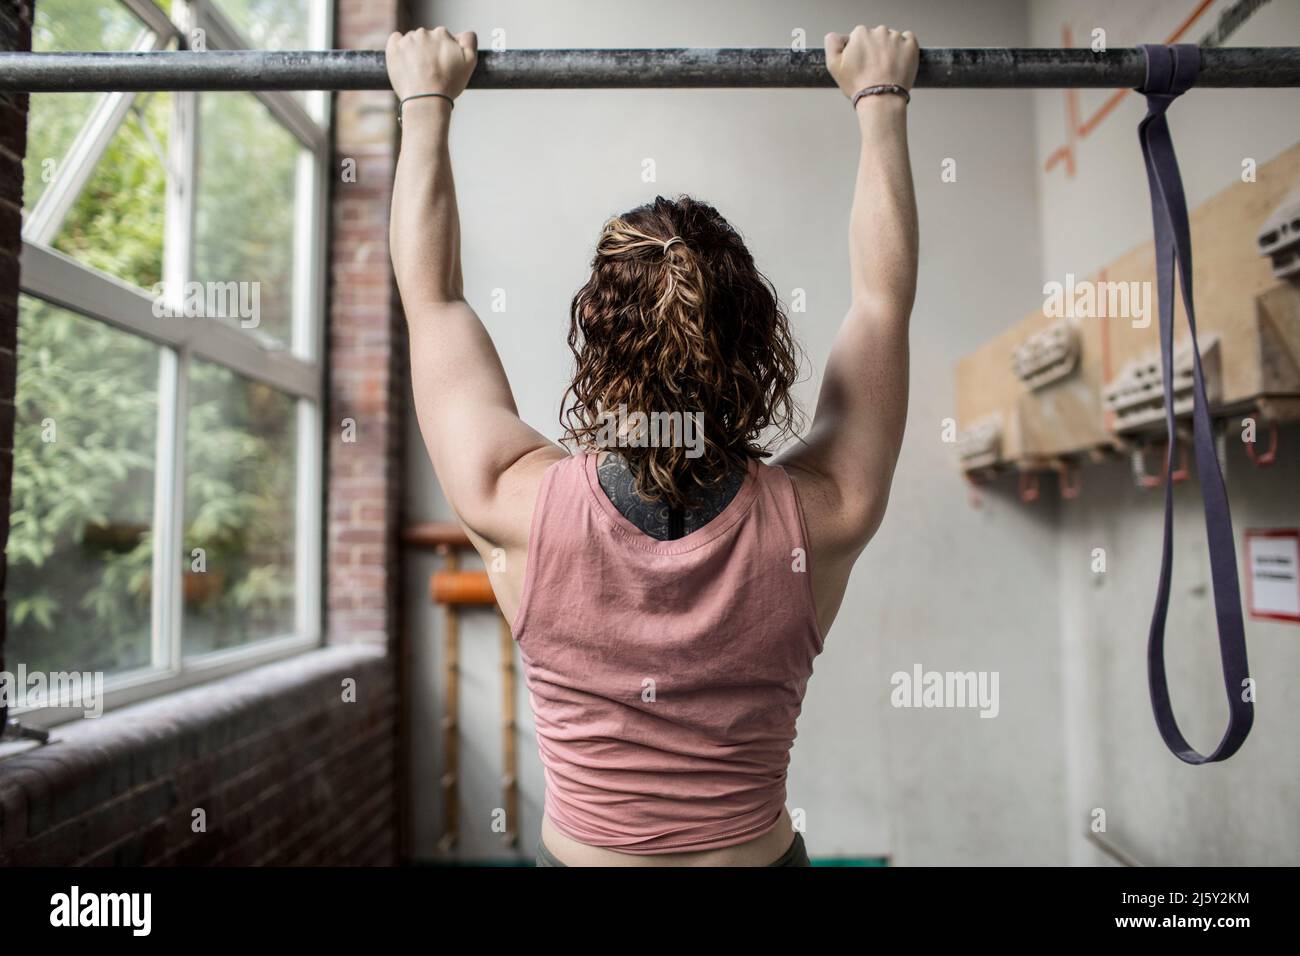 Muscular young woman working out at bar in gym Stock Photo